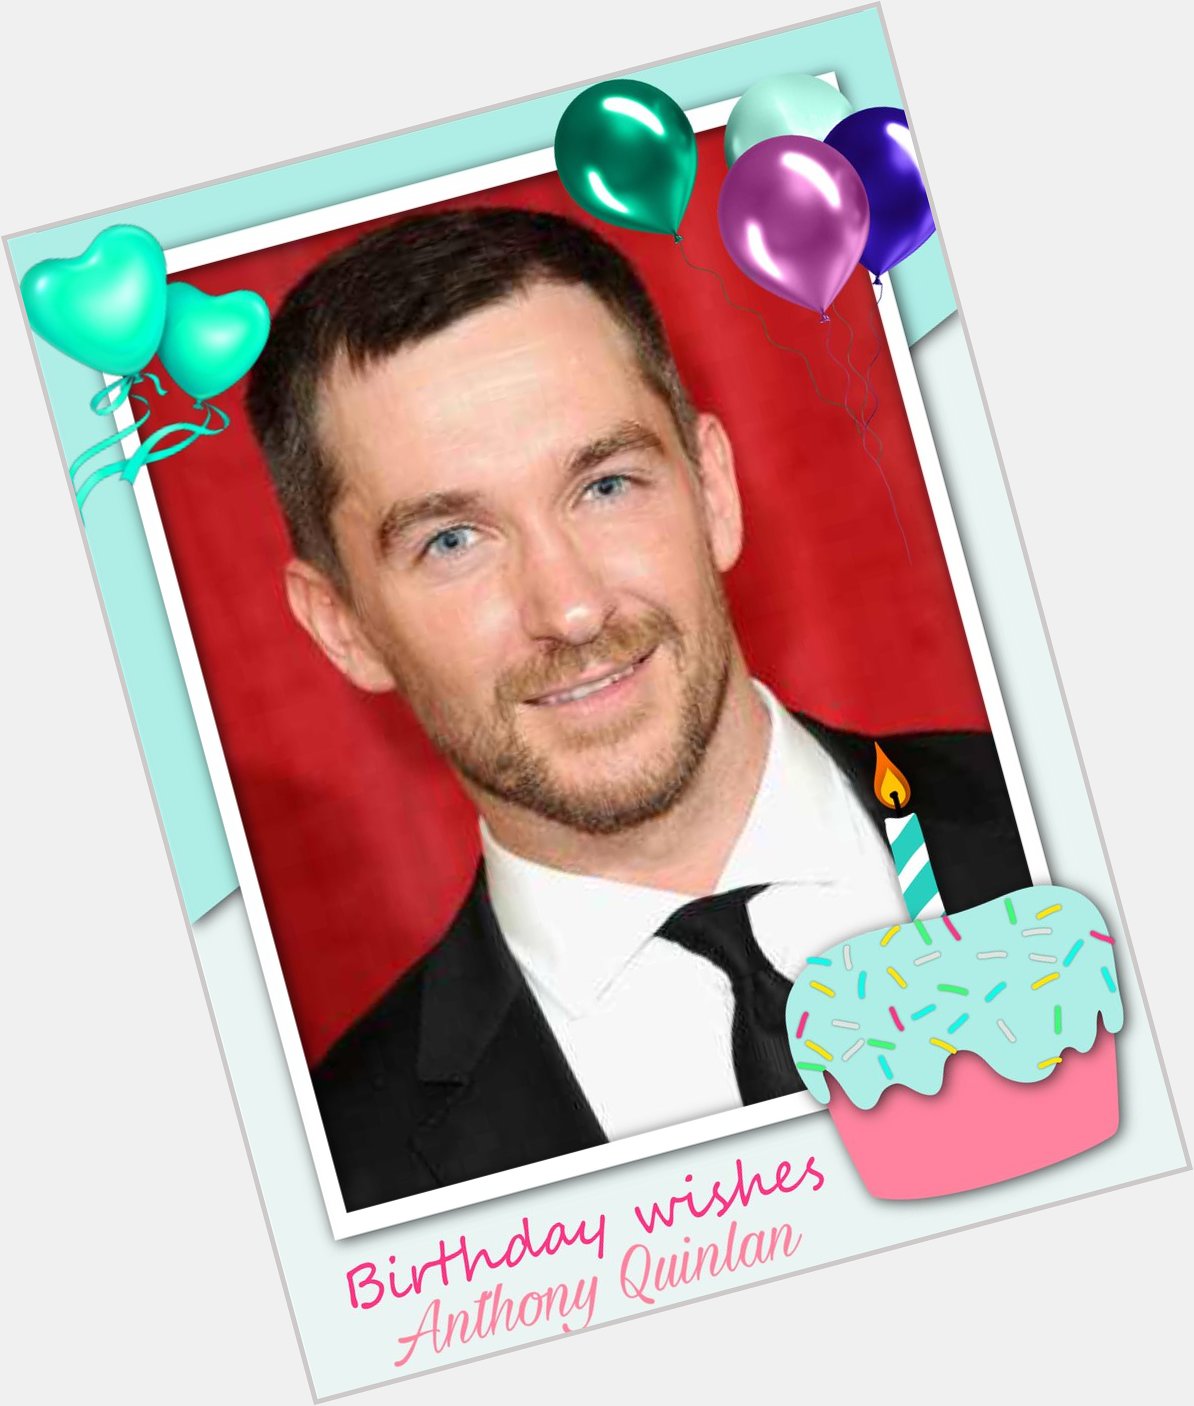 Happy Birthday to Anthony Quinlan, Peter Ashdown, Joe Dolan, Dave Hill, Suzanne Somers, Terry Griffiths 